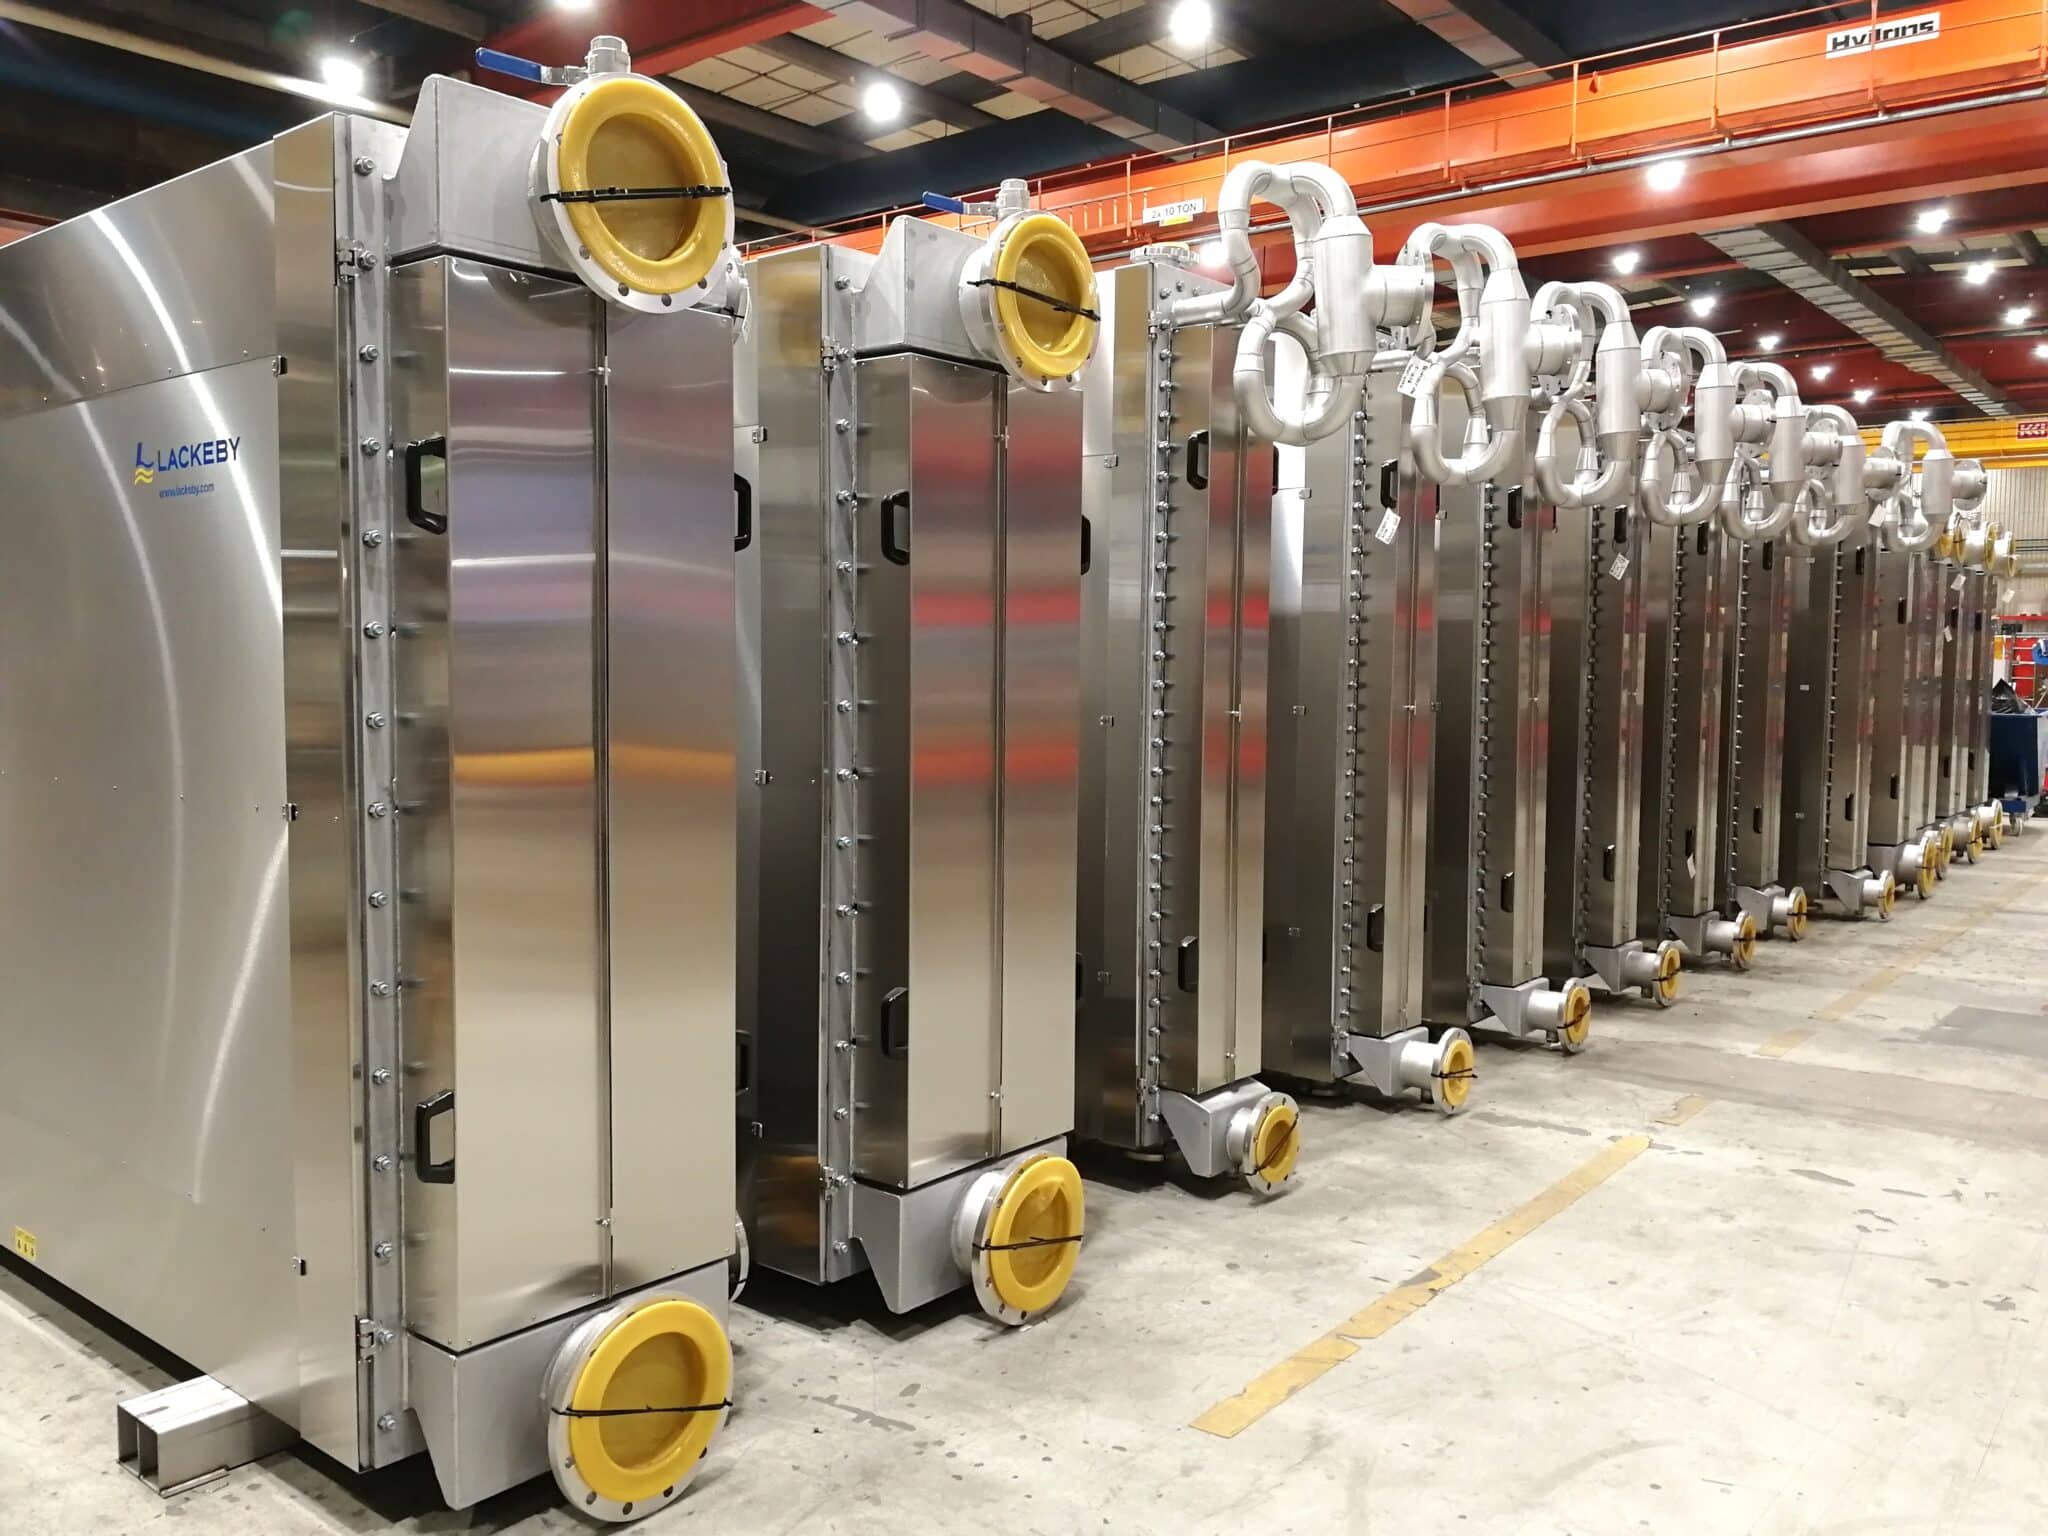 You are currently viewing Lackeby heat exchanger in Europe’s largest WWTP